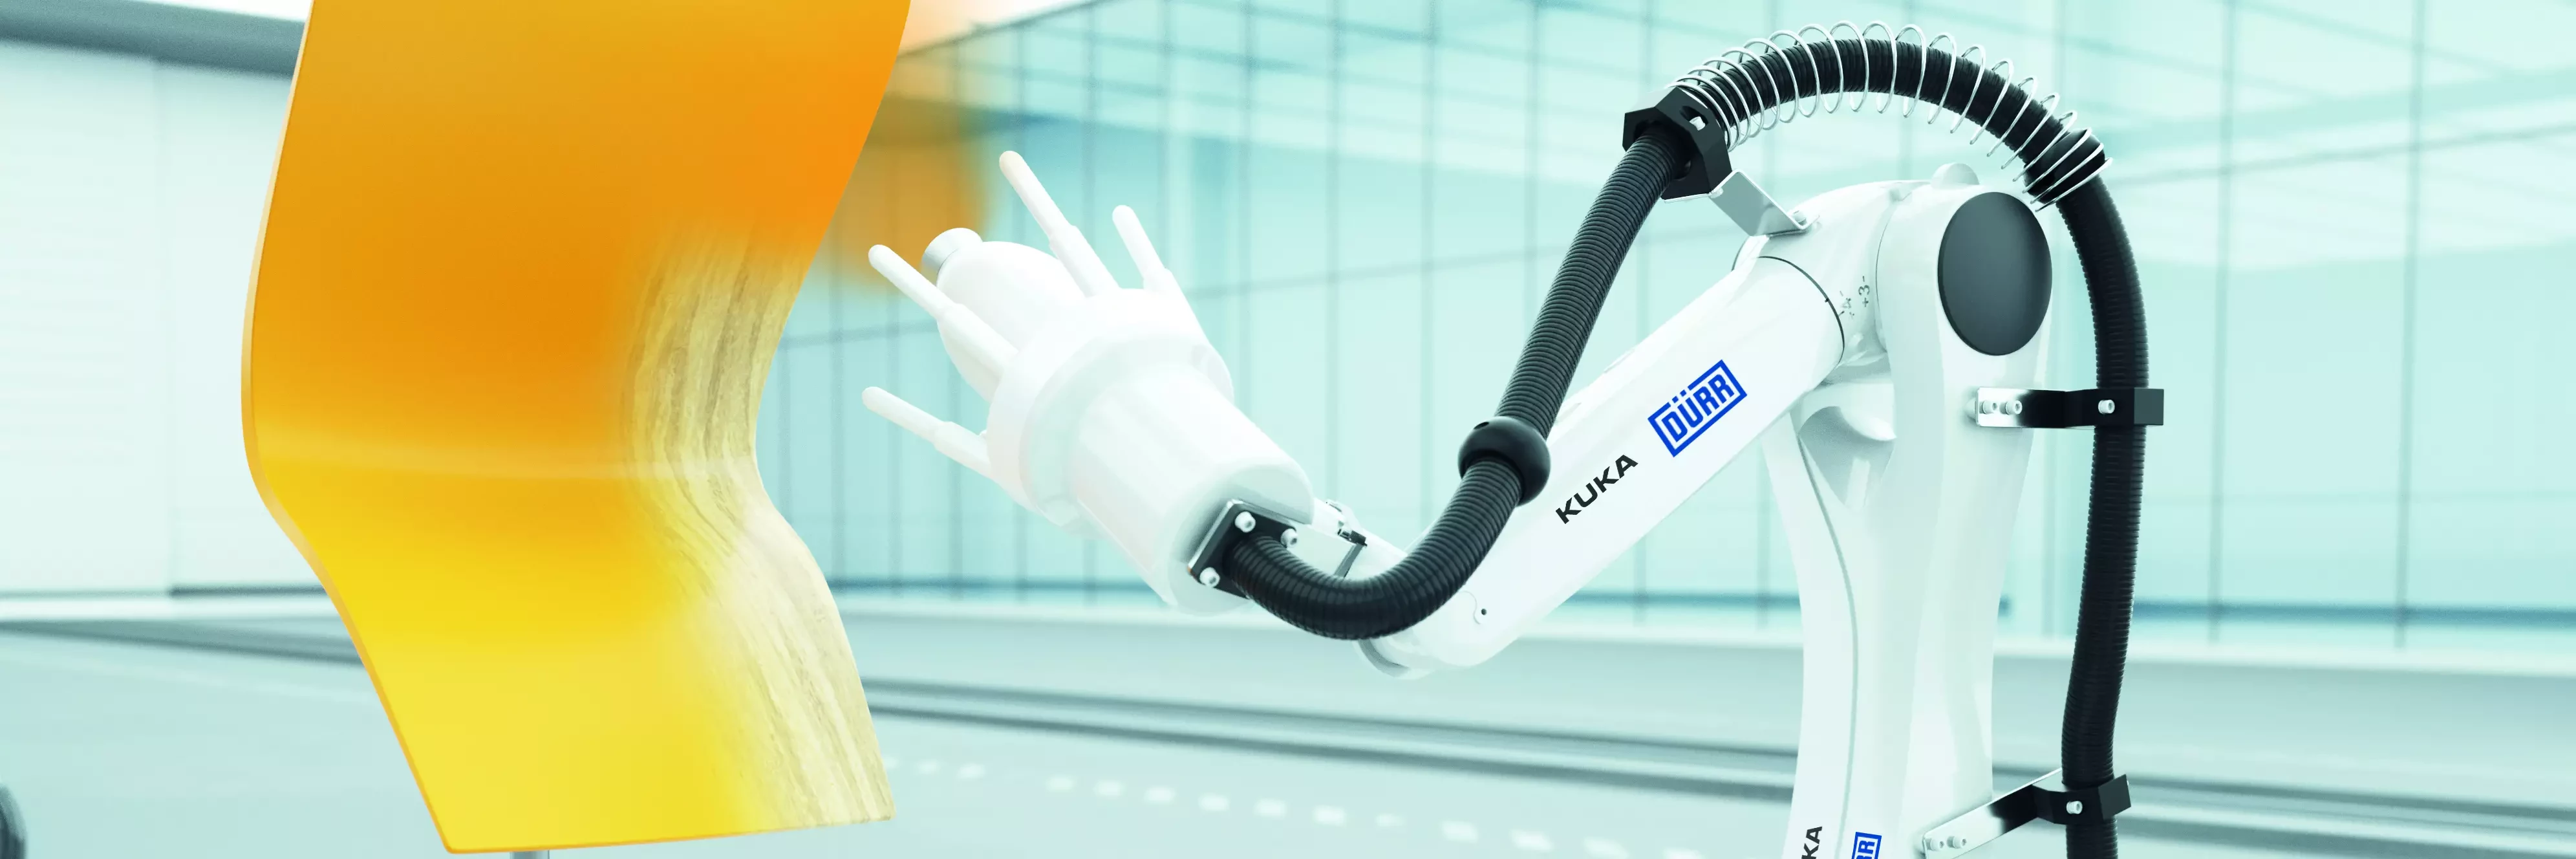 Paint robot ready2spray by Dürr is suitable for the general industry.